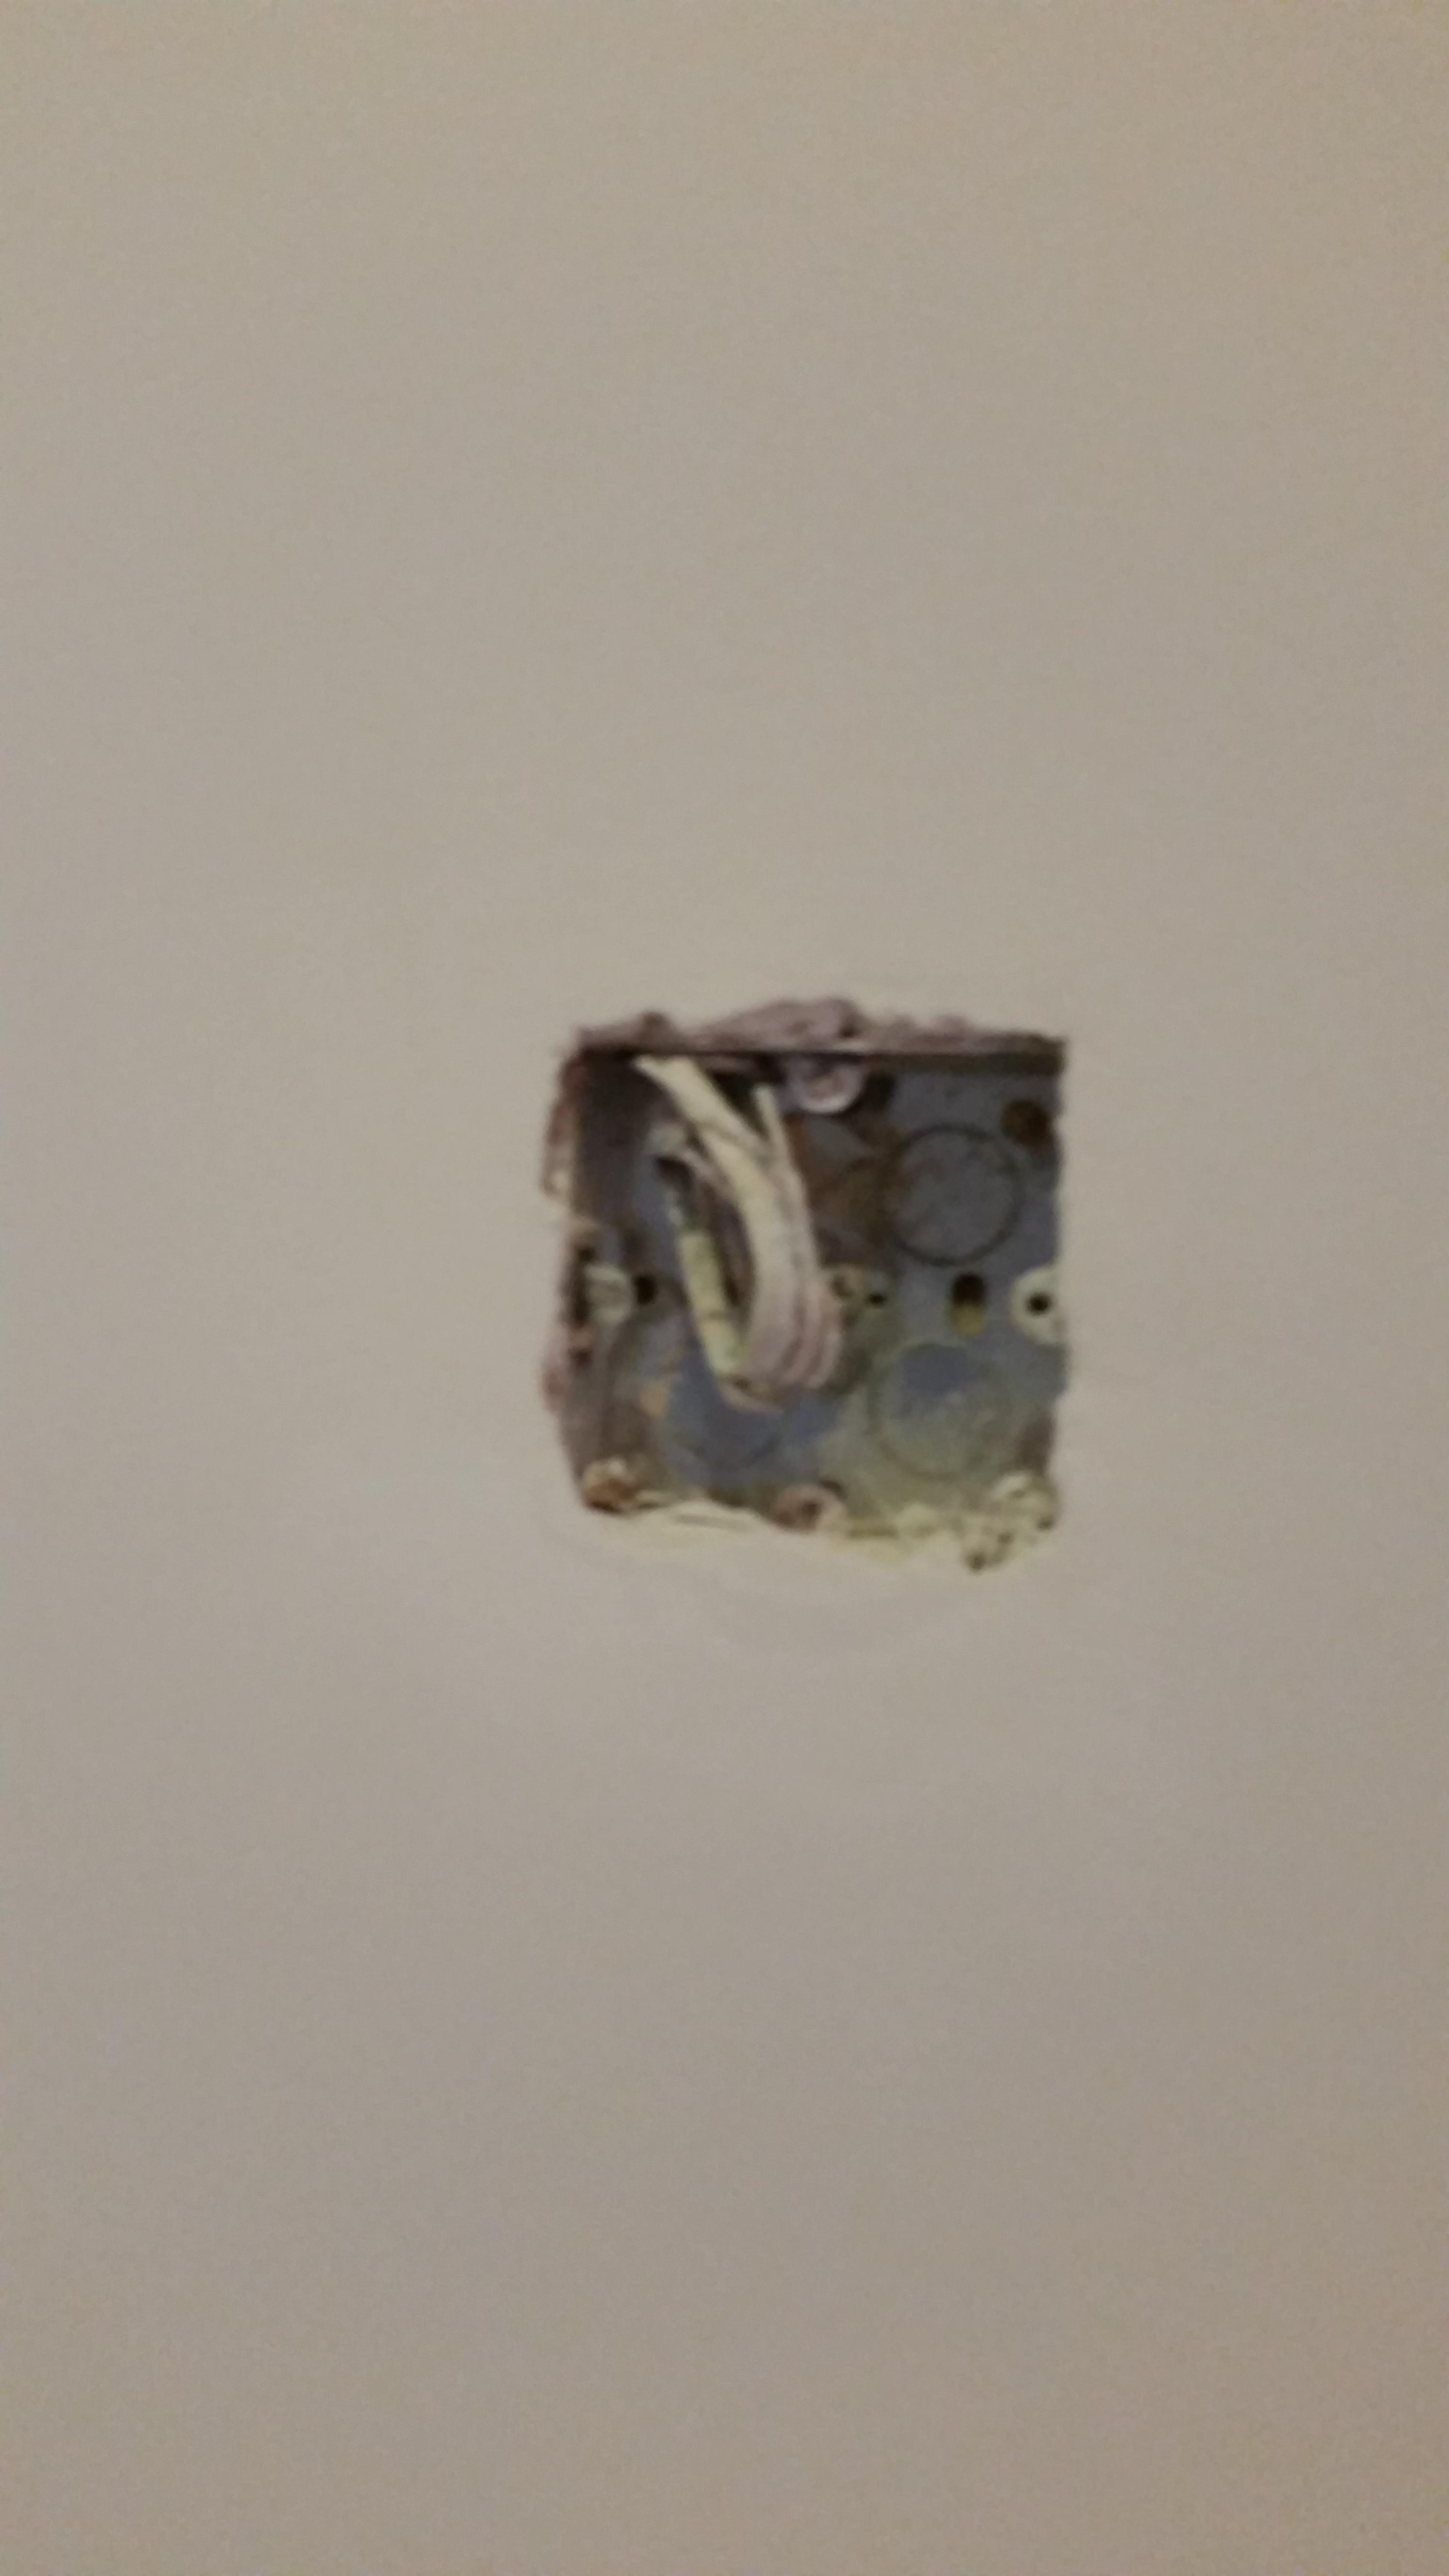 Fit all light switches and sockets before booking your air tightness test.